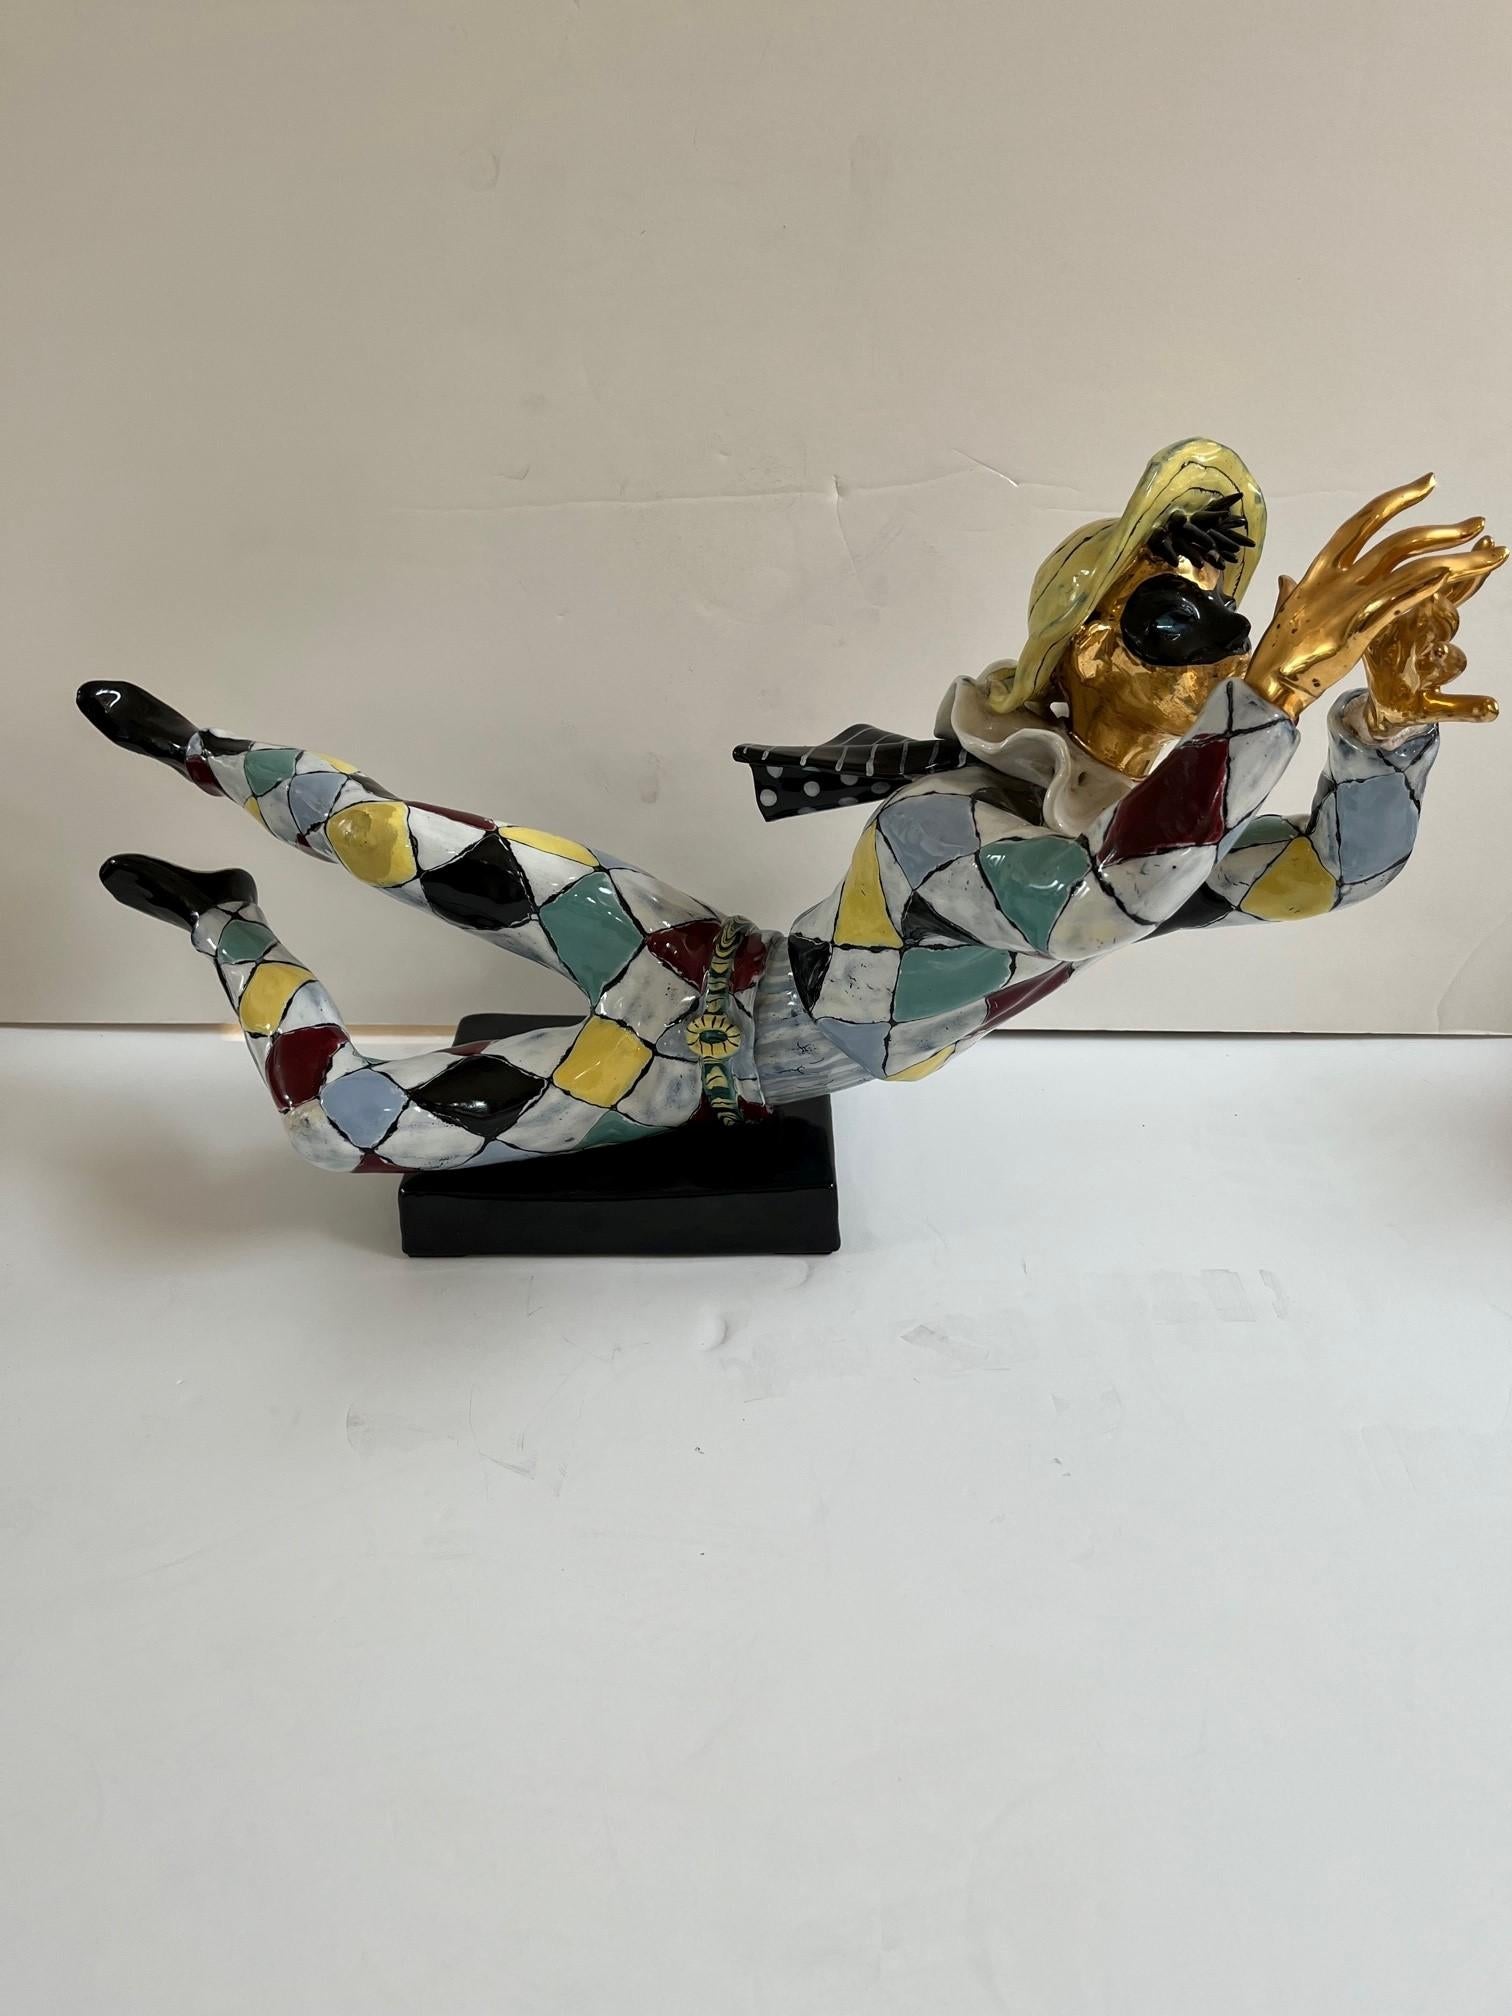 Vintage Italian Colorful Ceramic Harlequin Figure by Otello Rosa for San Polo For Sale 5